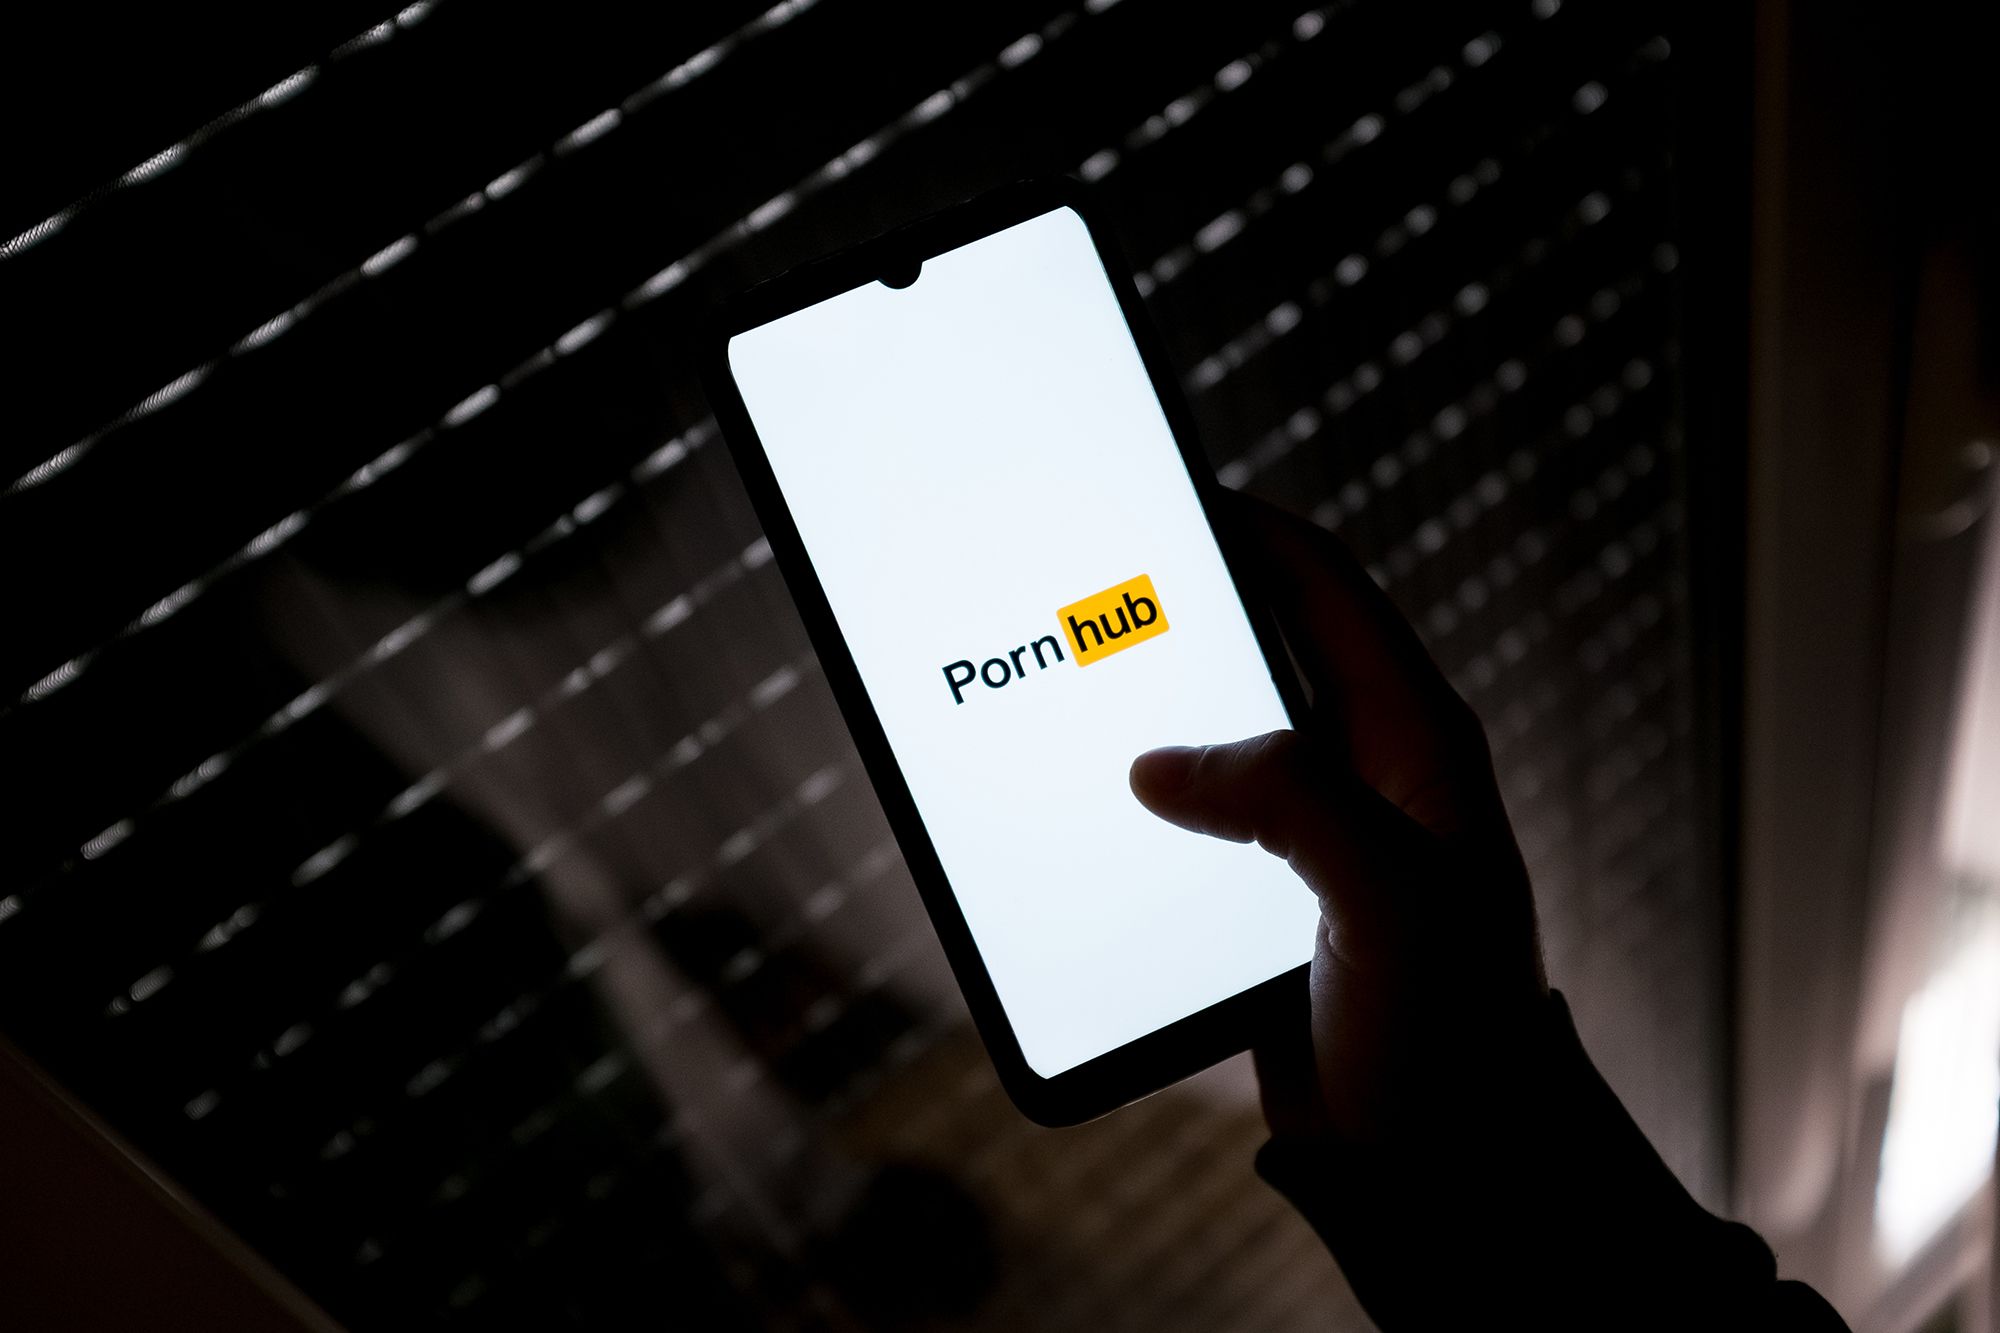 Pornhub asks users, Big Tech for help as states adopt age verification laws  | CNN Business